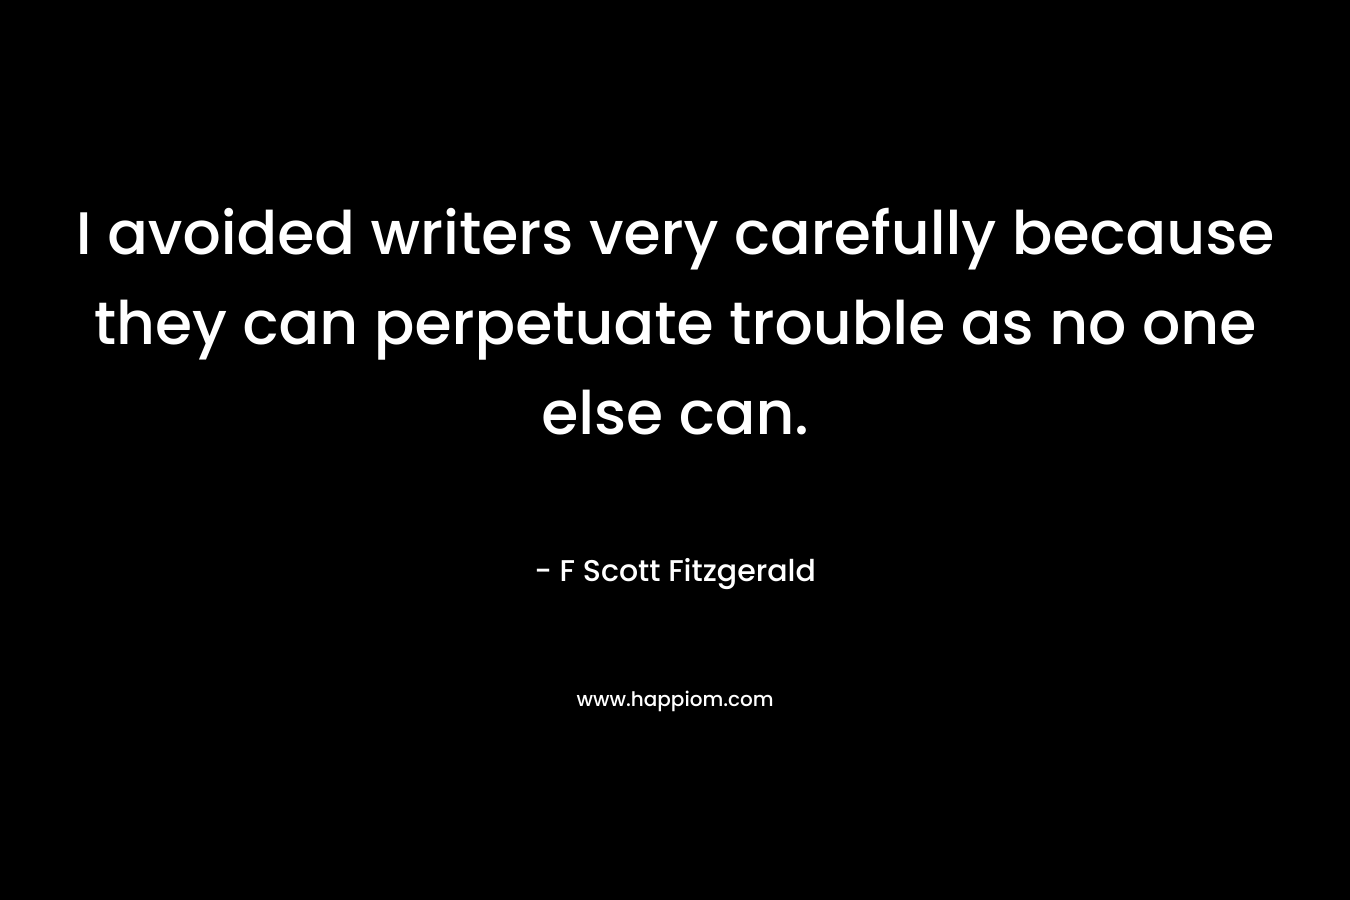 I avoided writers very carefully because they can perpetuate trouble as no one else can. – F Scott Fitzgerald